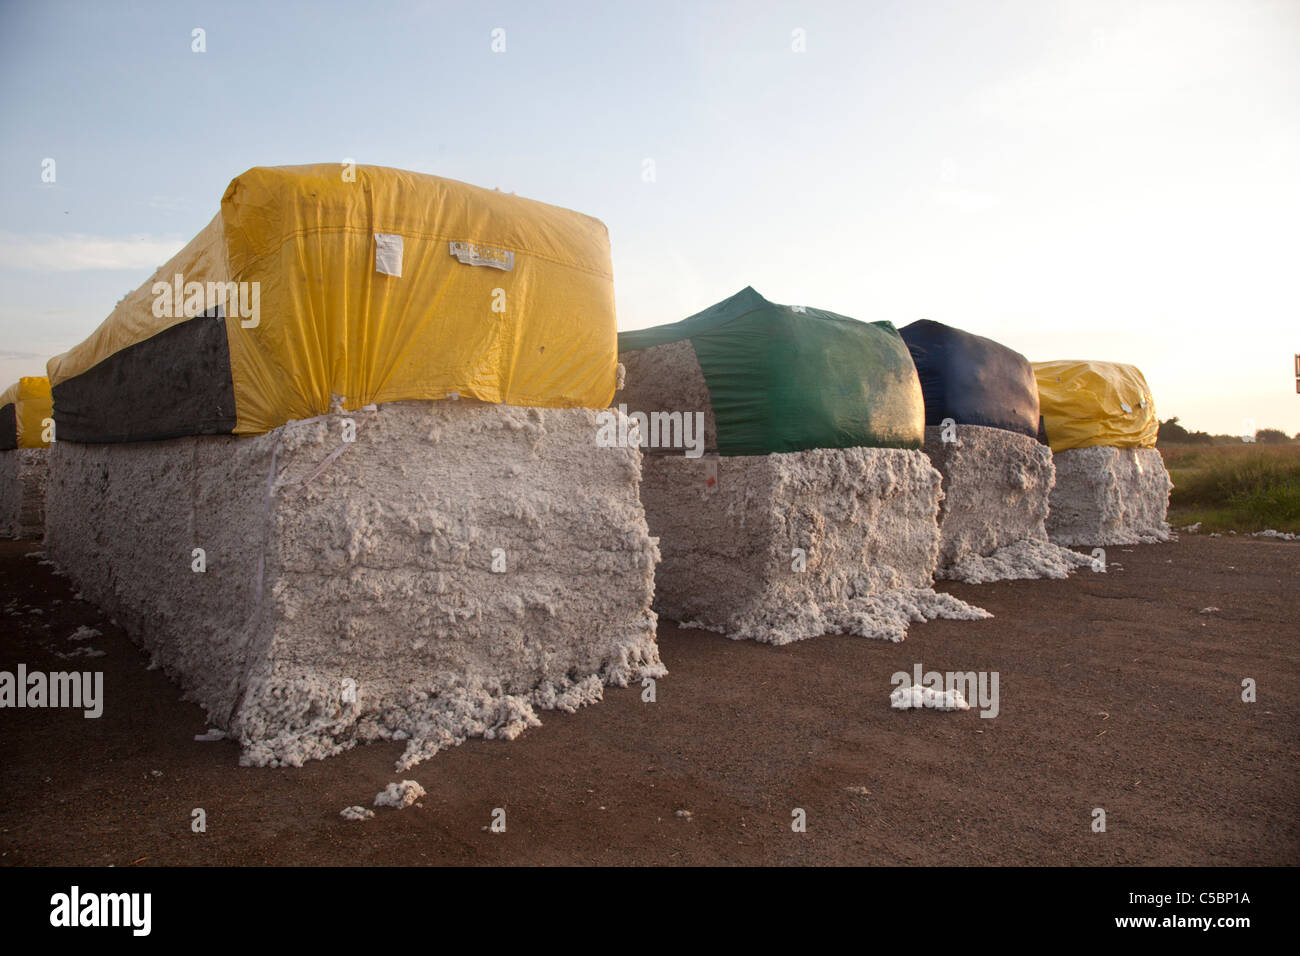 large-cotton-bales-covered-with-yellow-tarps-sit-in-a-cotton-field-C5BP1A.jpg